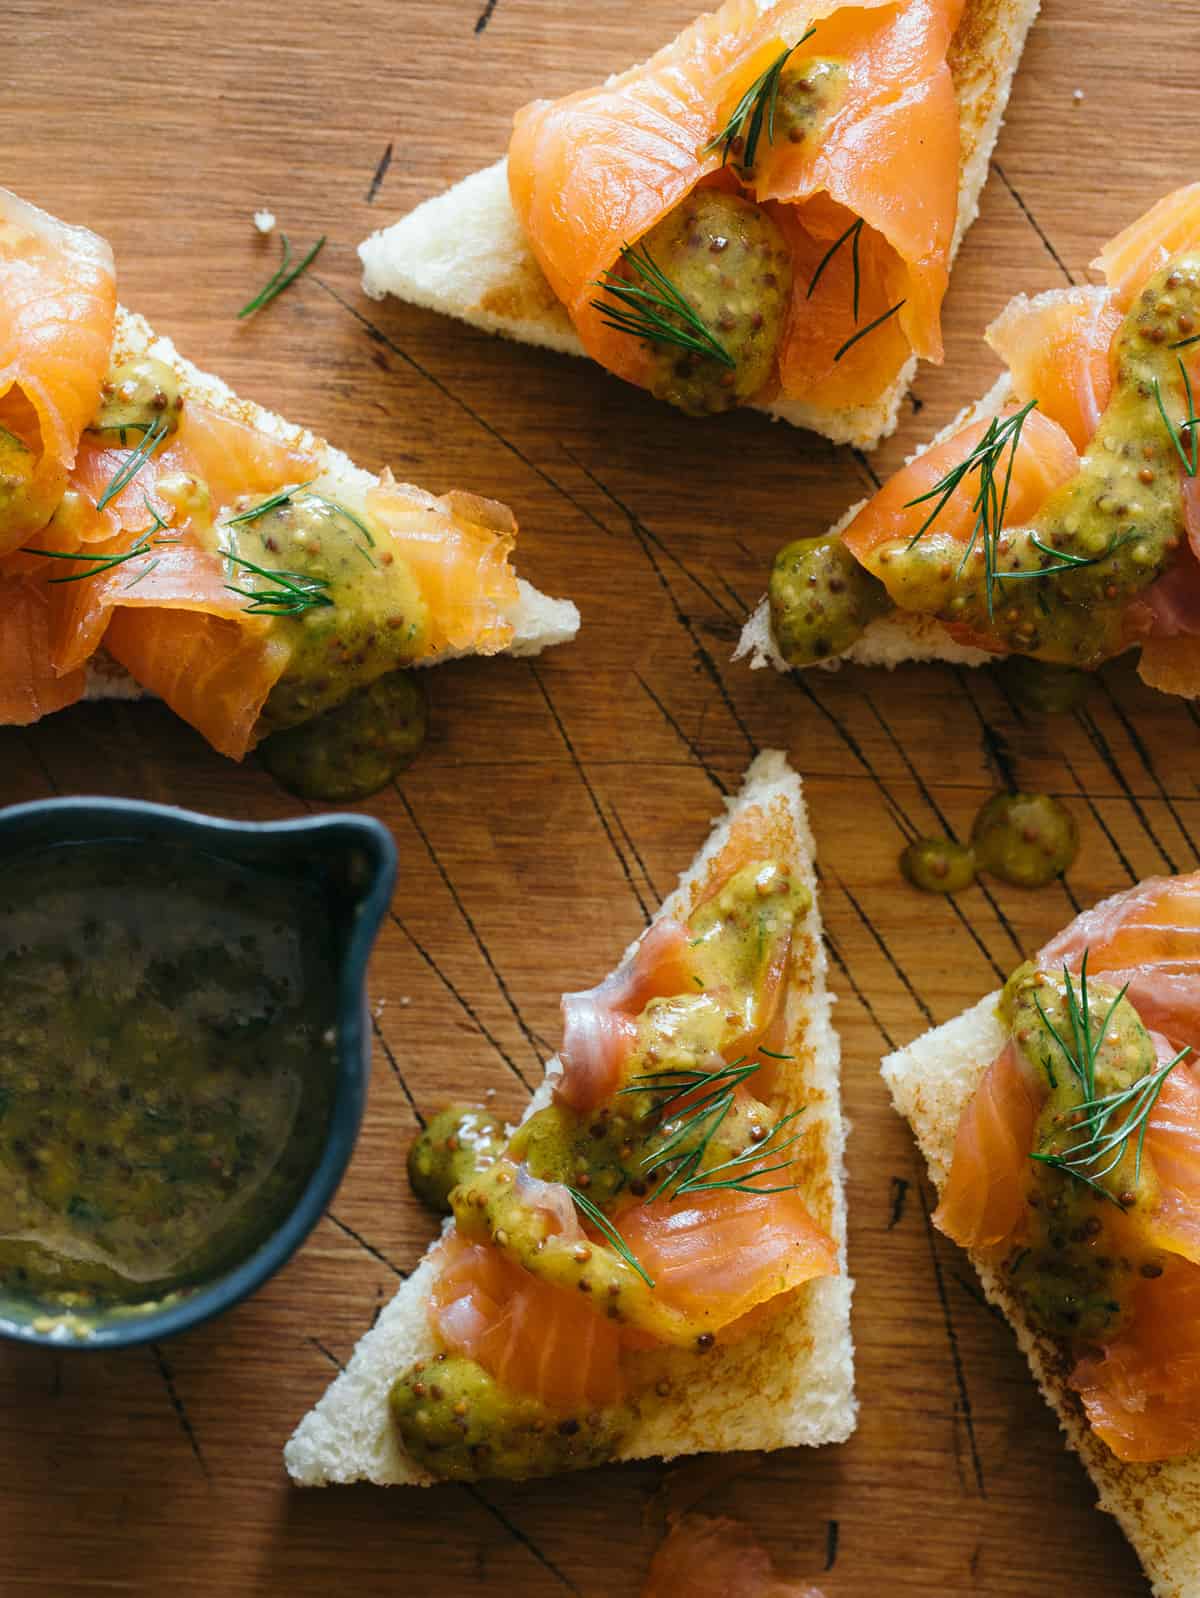 Slices of DIY gravlax with whole grain mustard sauce drizzled and on the side.